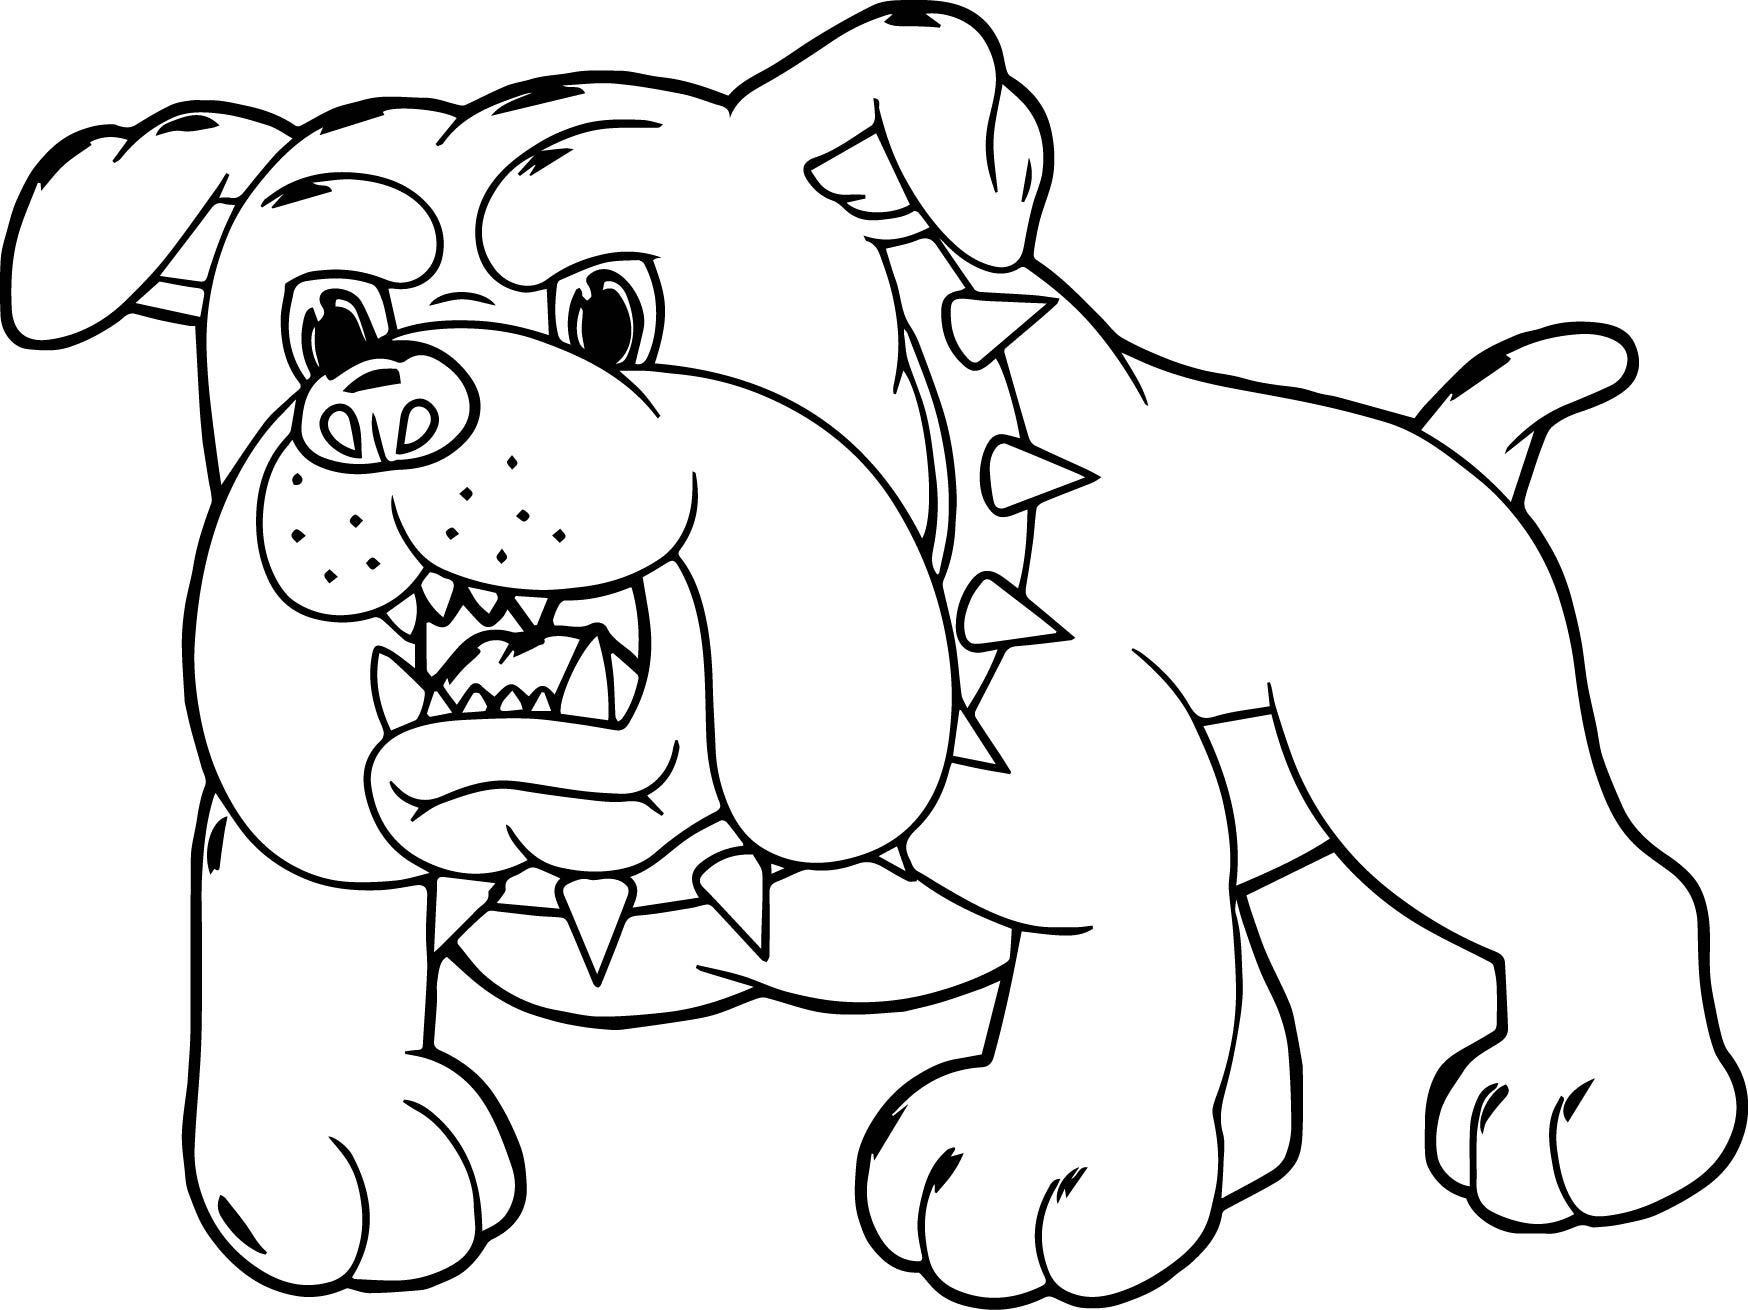 Coloring Pages Of A Dog
 100 Cute Cartoon Dogs Coloring Page Puppy To